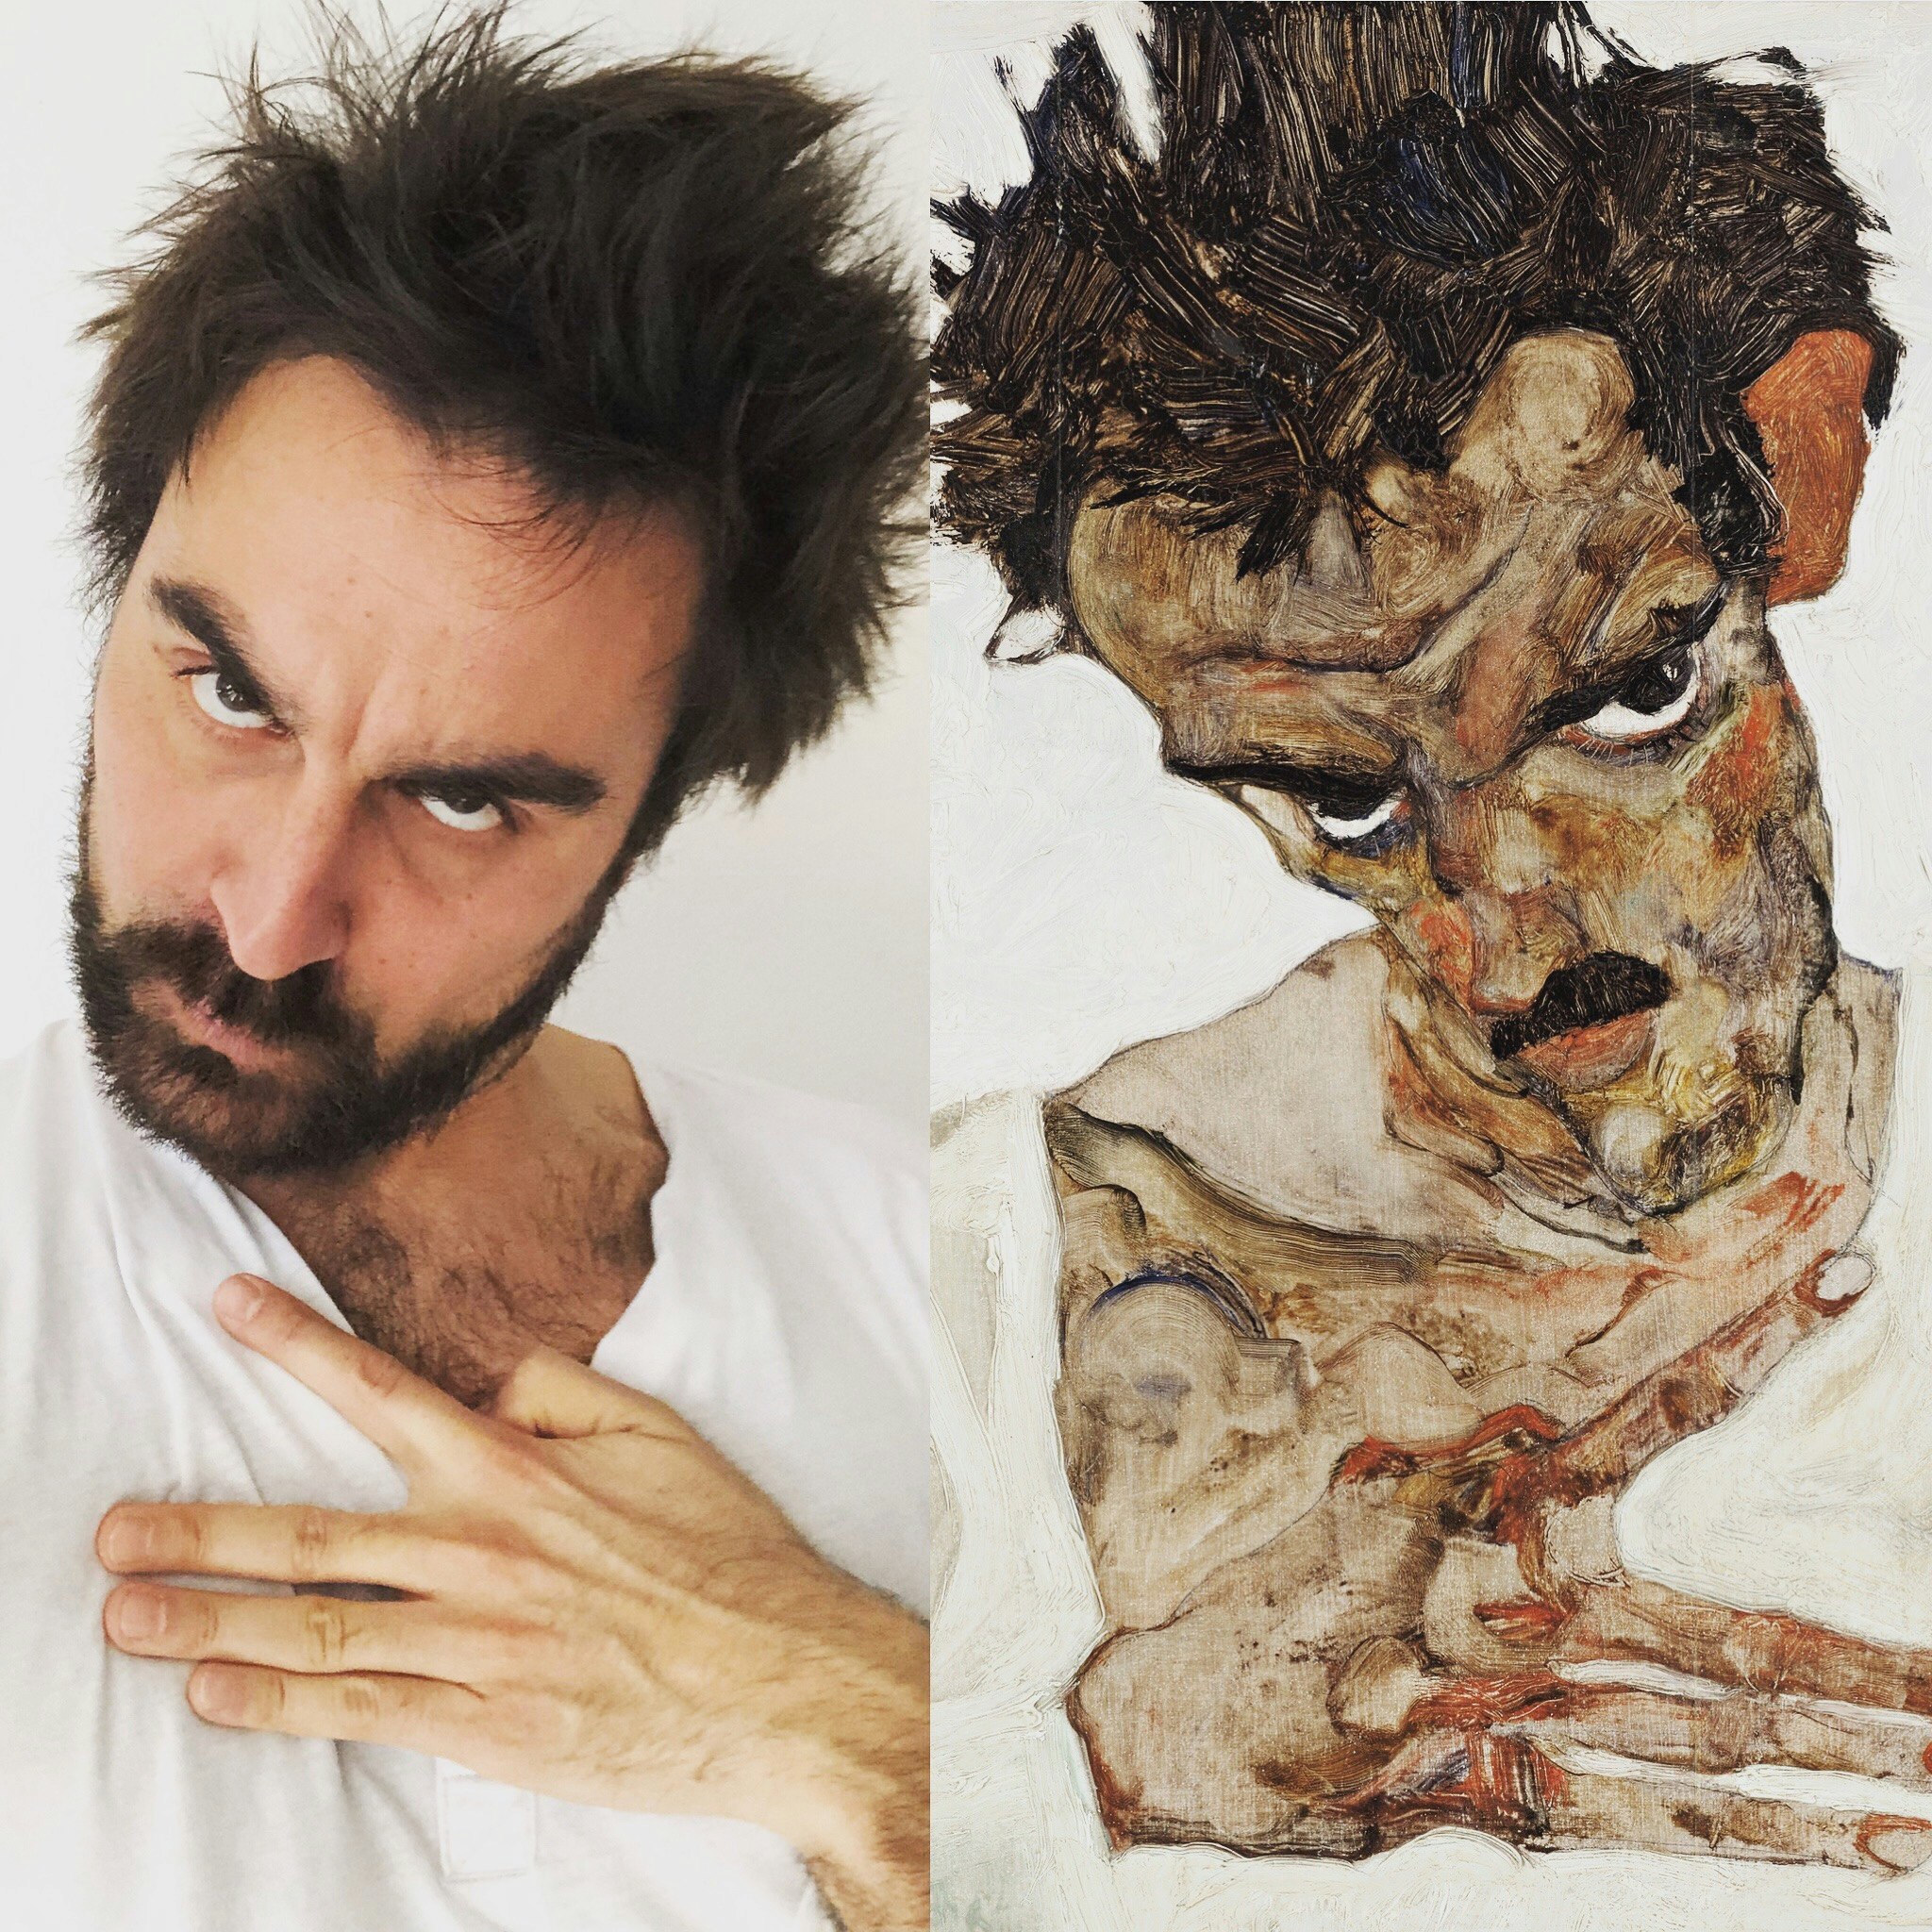 Federico Manfredi participates in the #betweenartandquarantine challenge, posing as Egon Schiele in his "Self-Portrait with Lowered Head"